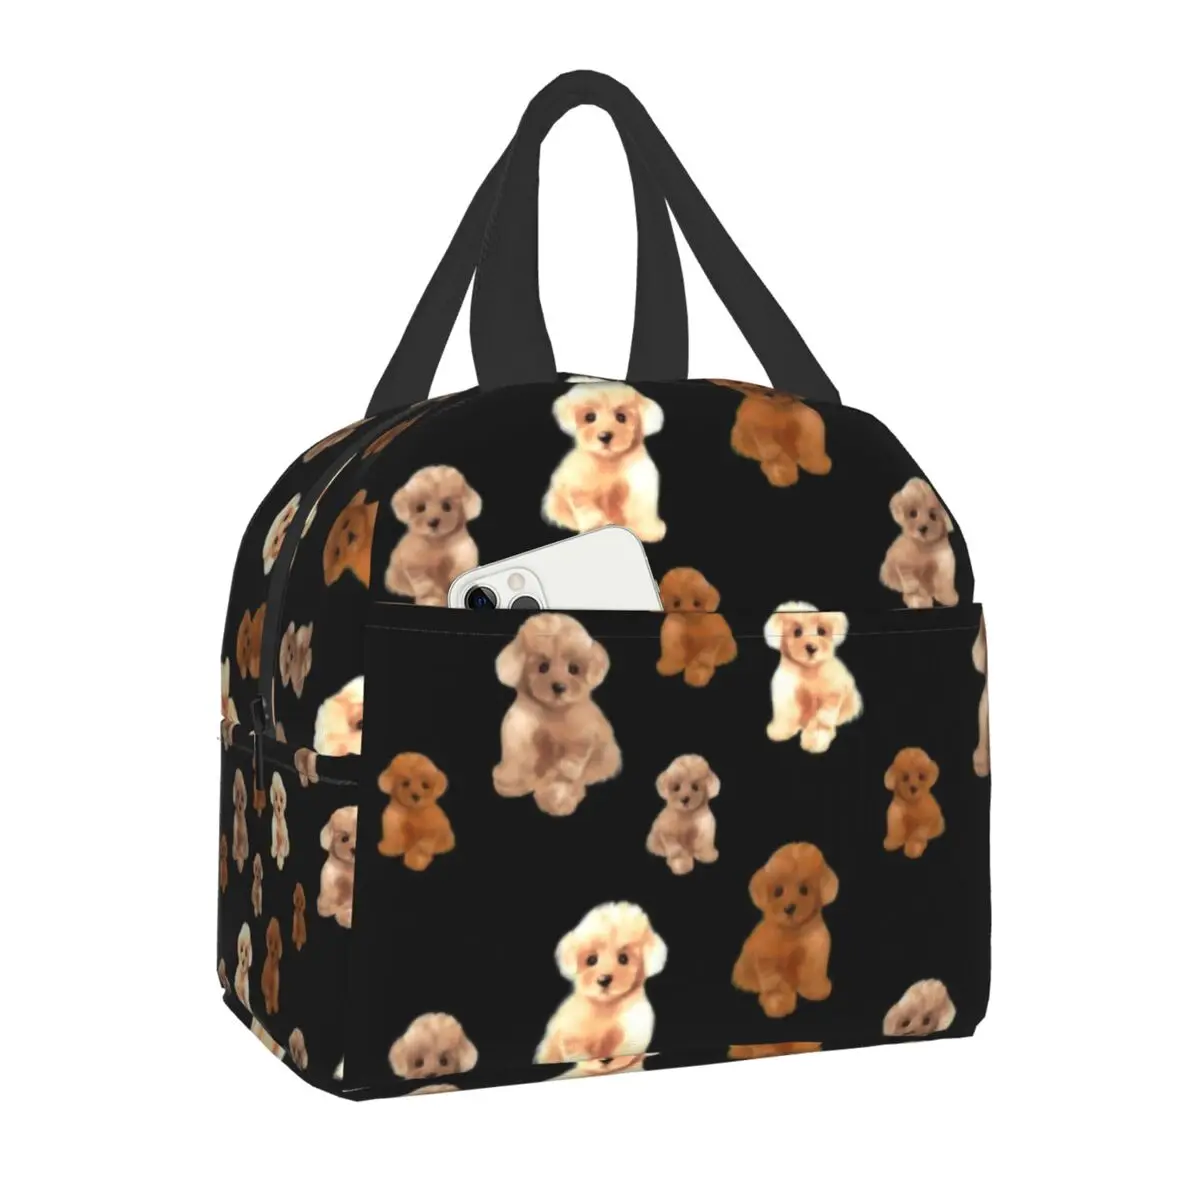 Teacup Poodle Dog Portable Lunch Box for Women Multifunction Pet Lover Thermal Cooler Food Insulated Lunch Bag Office Work